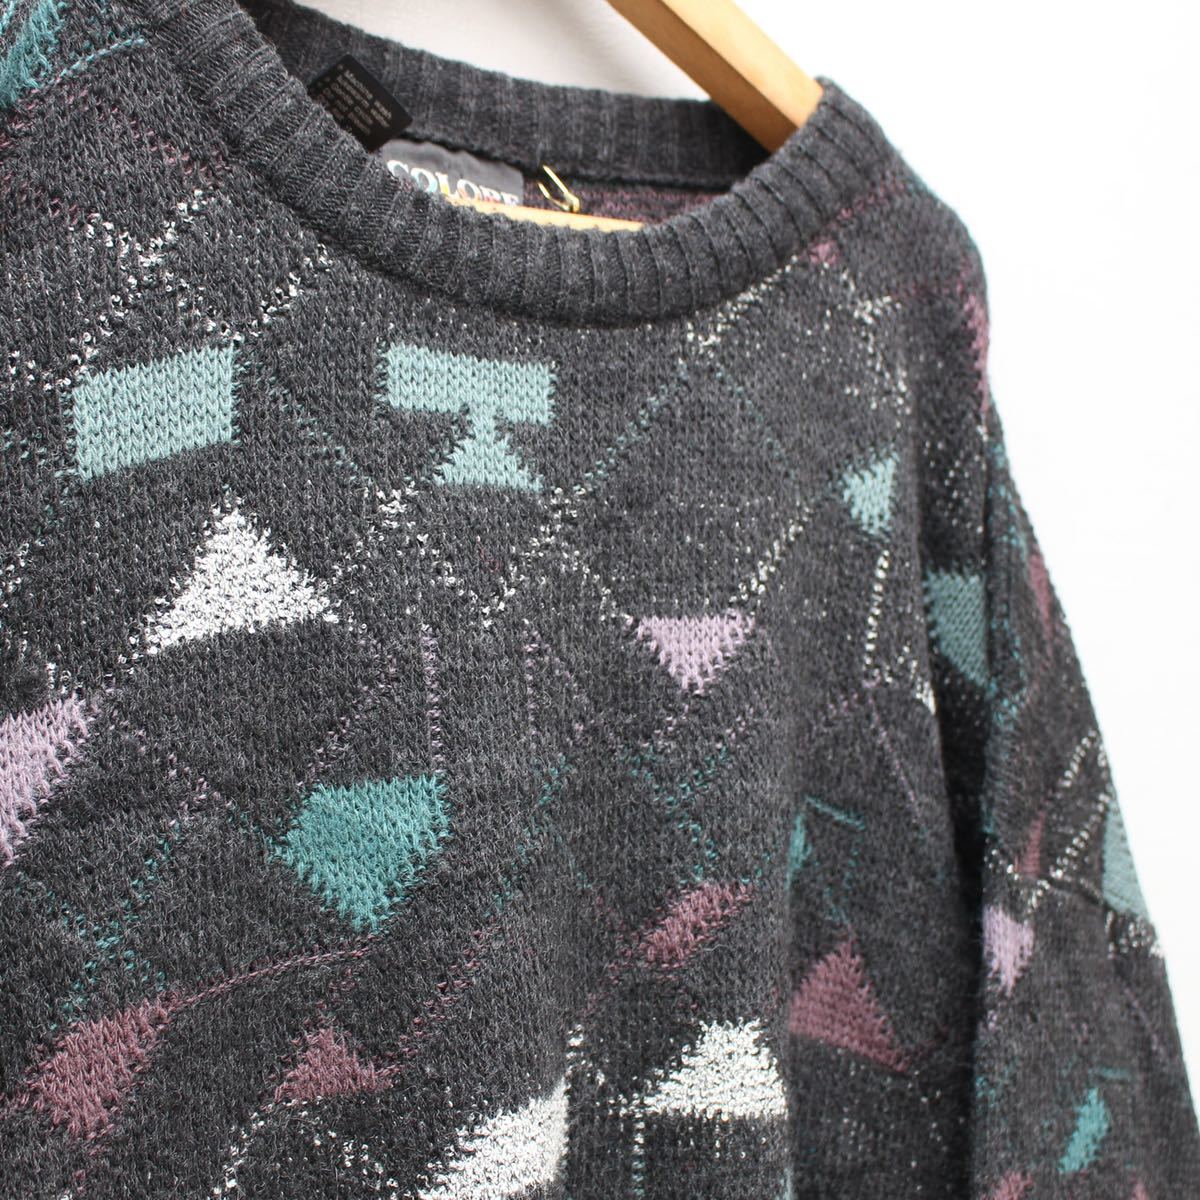 EU VINTAGE COLORE ITALIA PATTERNED DESIGN KNIT MADE IN ITALY